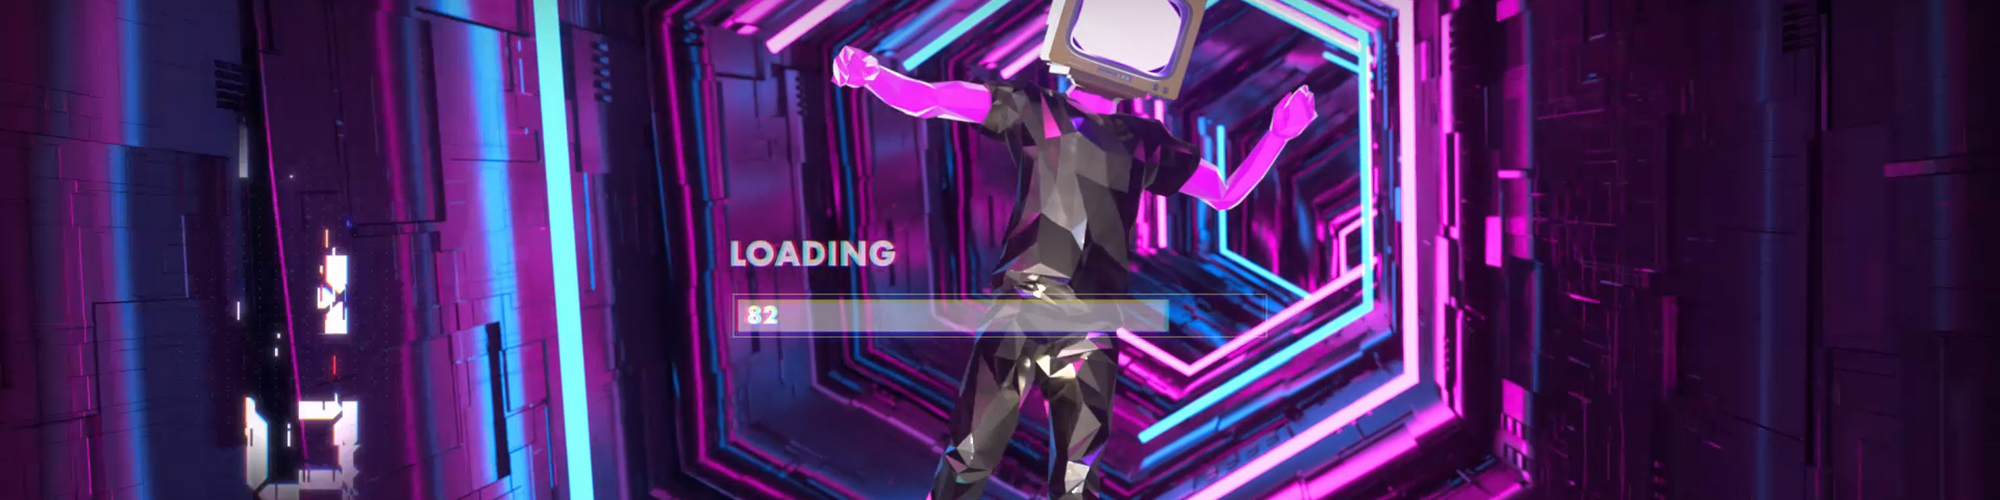 Entertainment design loading screen with a person who has a desktop monitor for a head